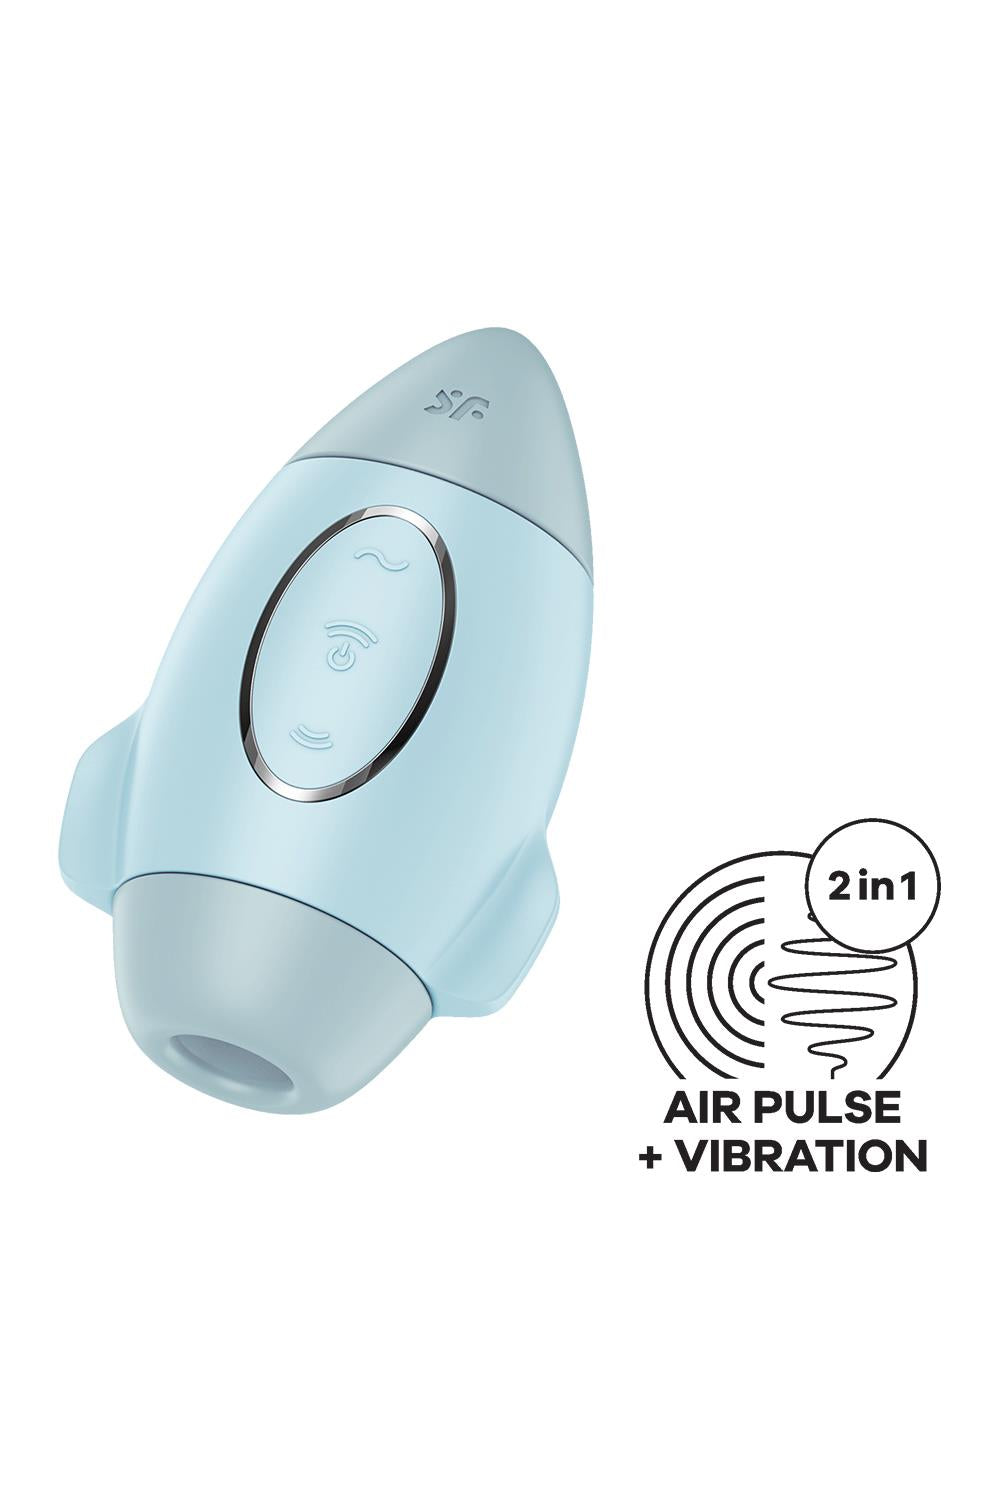 Satisfyer - Mission Control - Air Pulse Vibrator